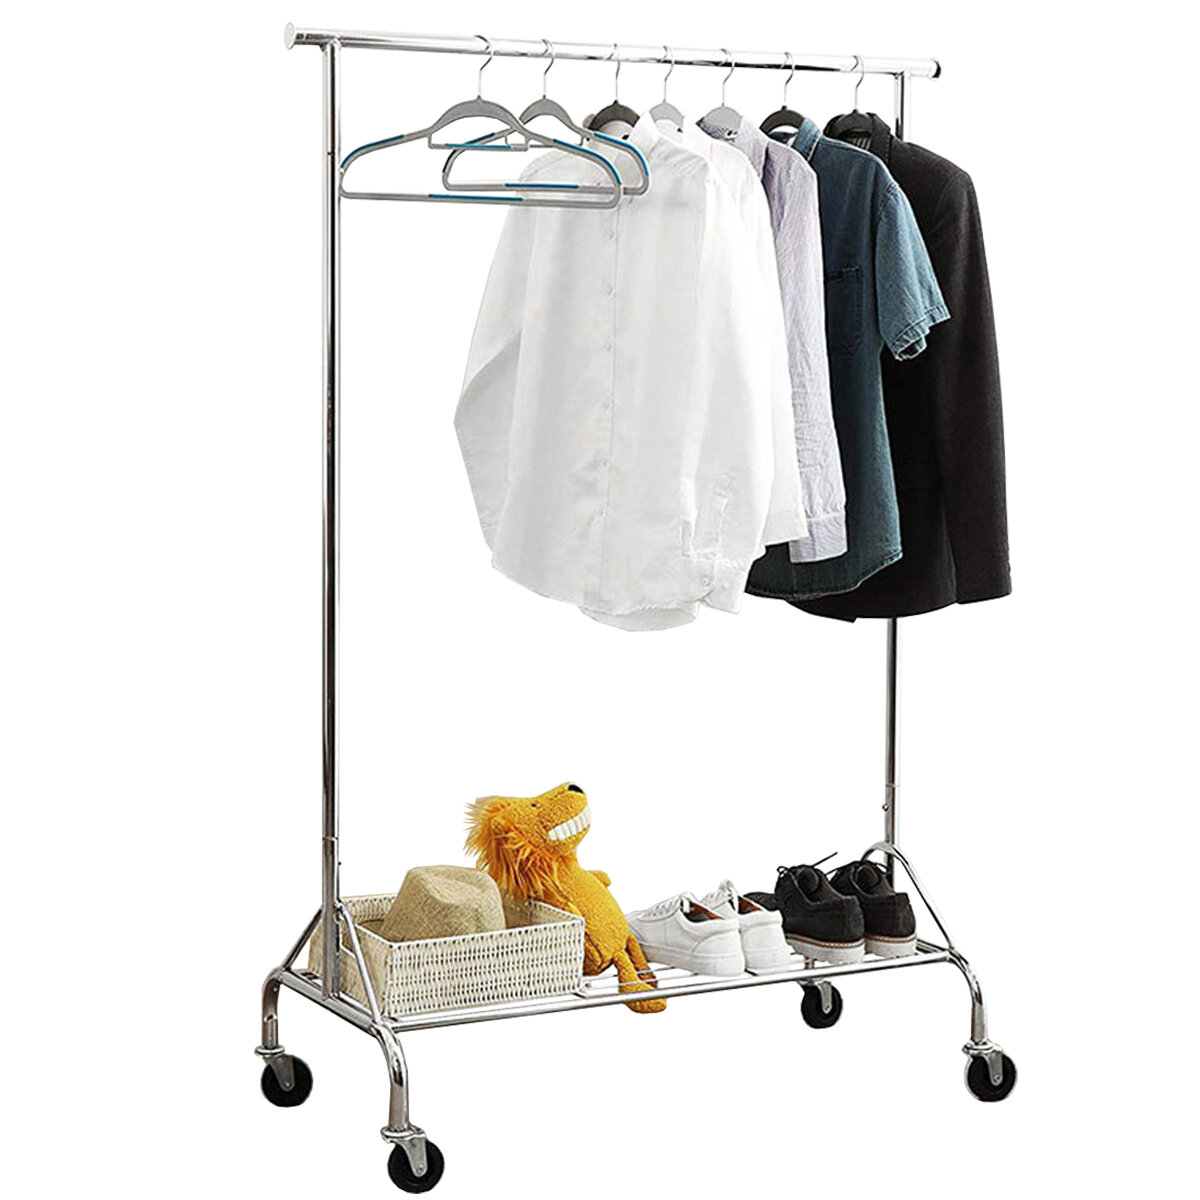 

1pc Garment Rack with a Net Shelf and wheels Mobile Folding Convenient Storage Clothes Hanger Household Organizer Suppli